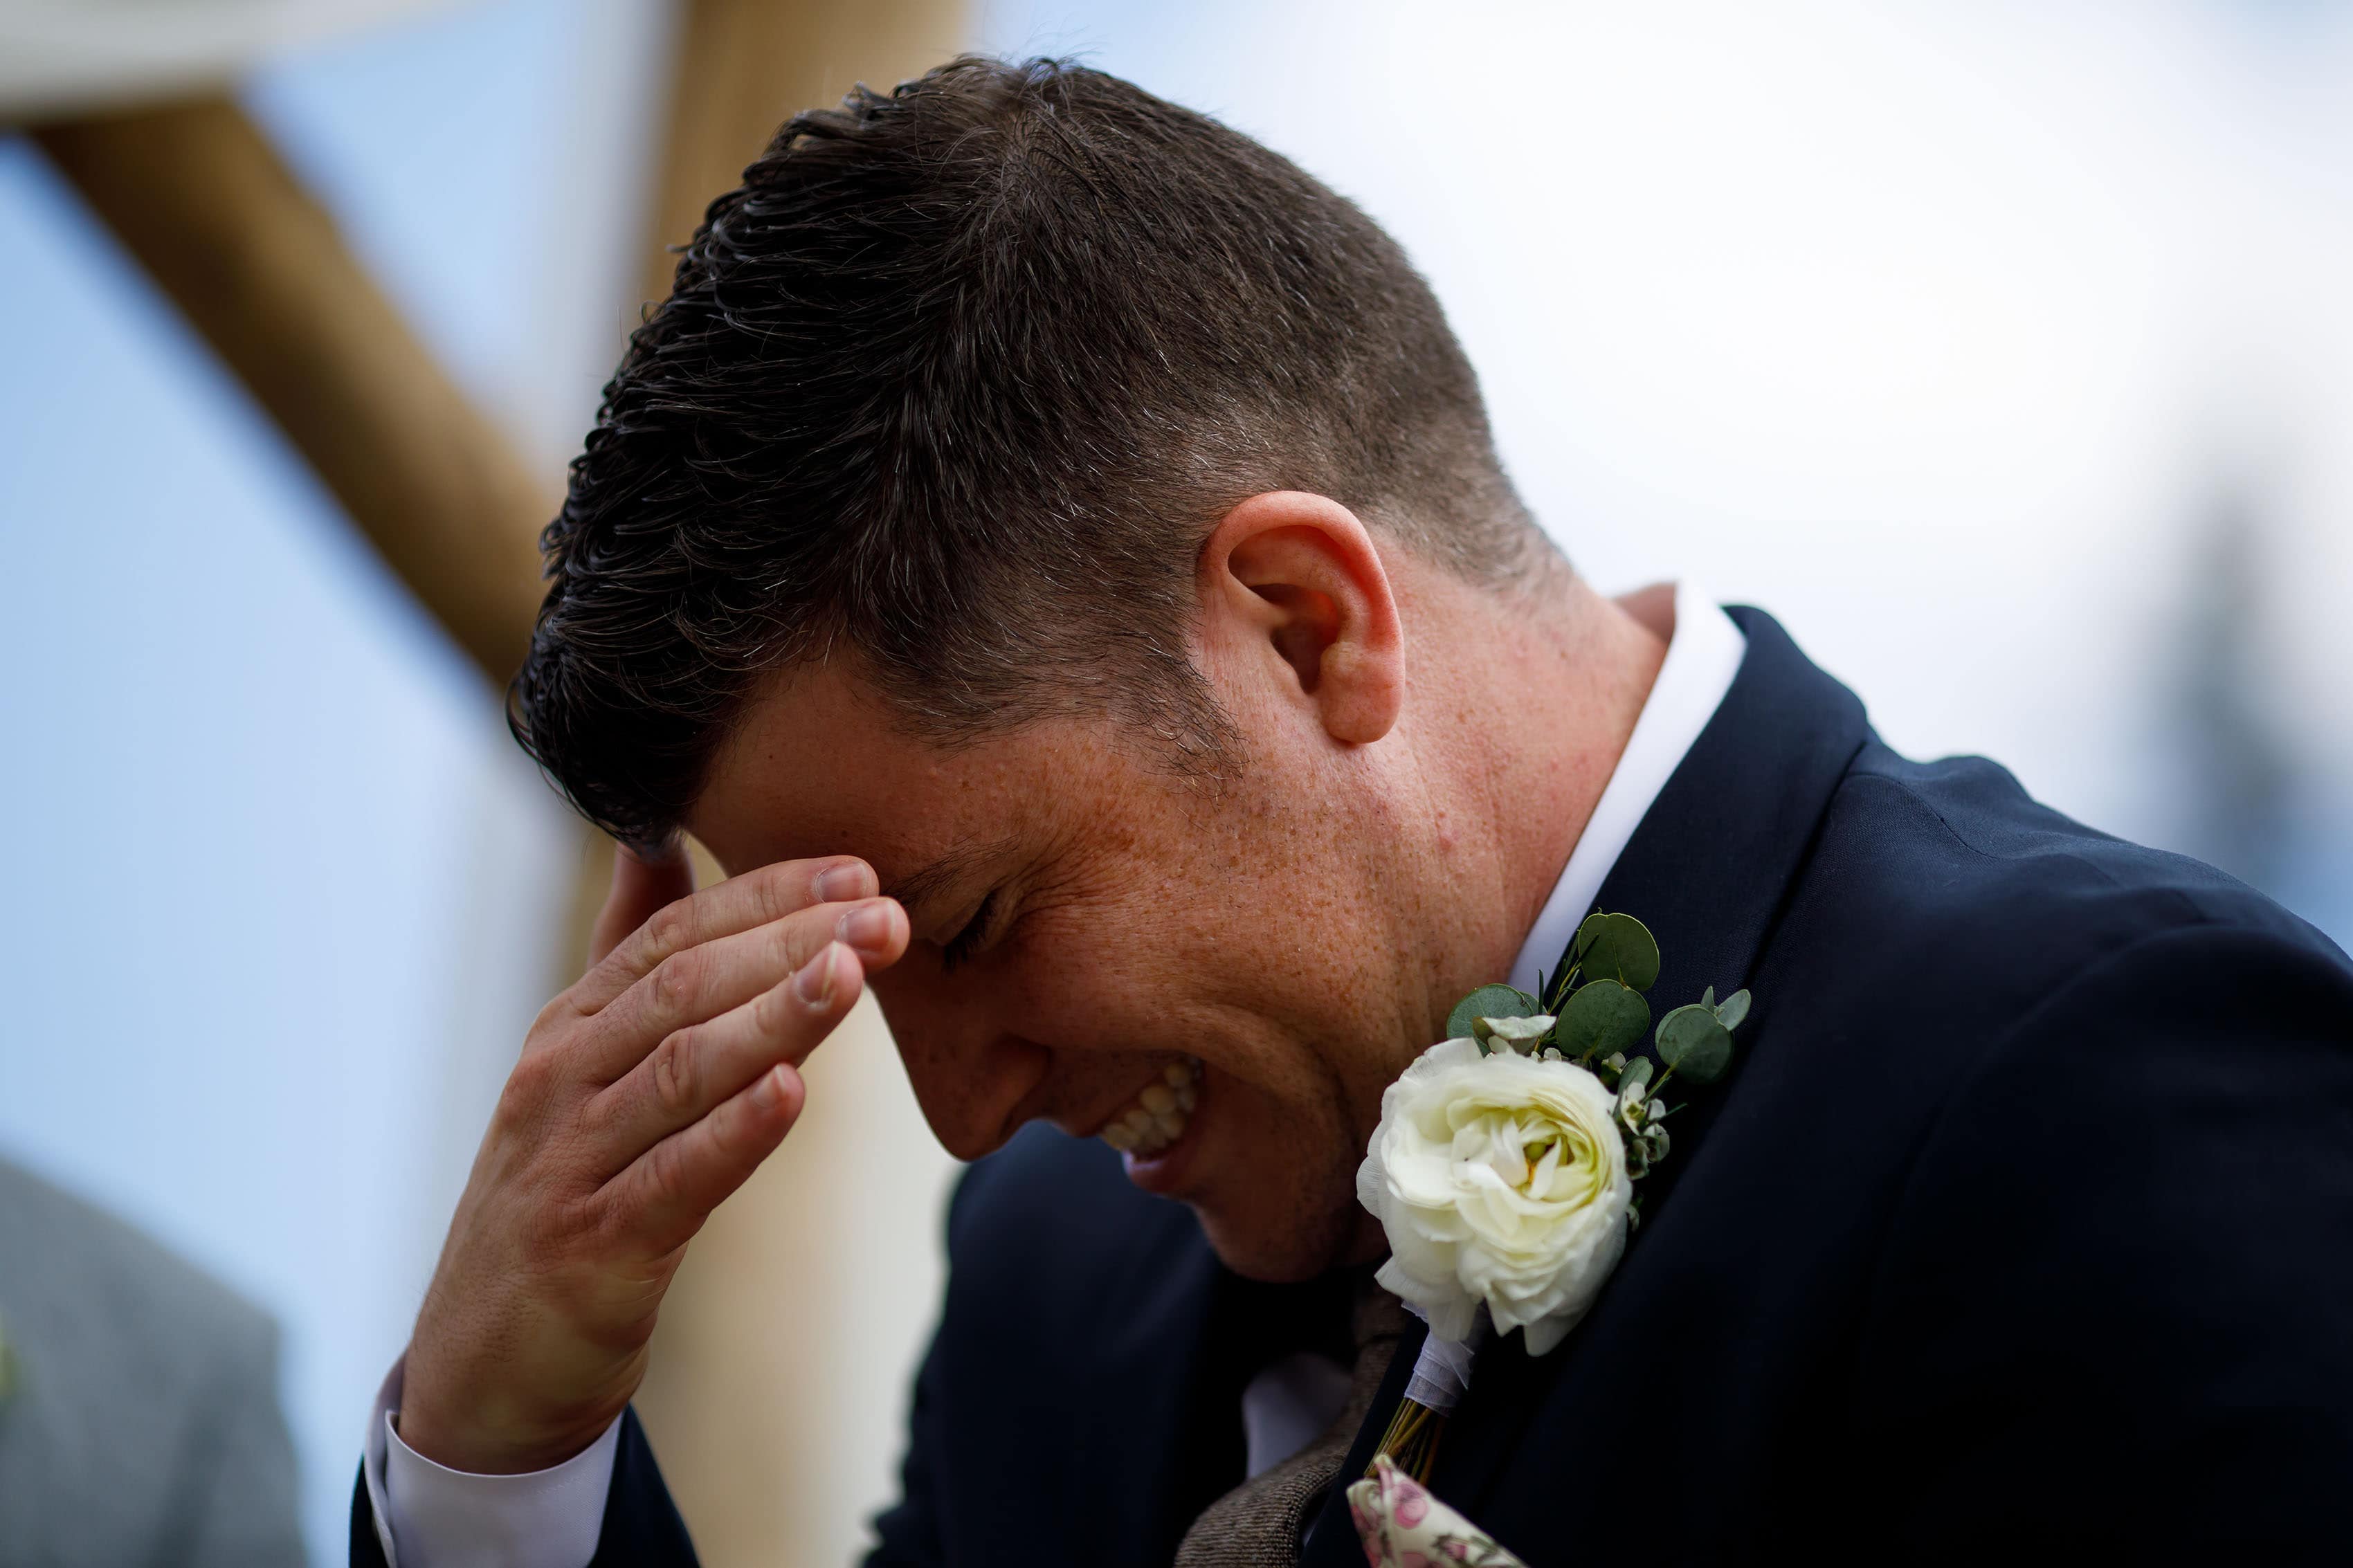 Matt reacts during the ceremony